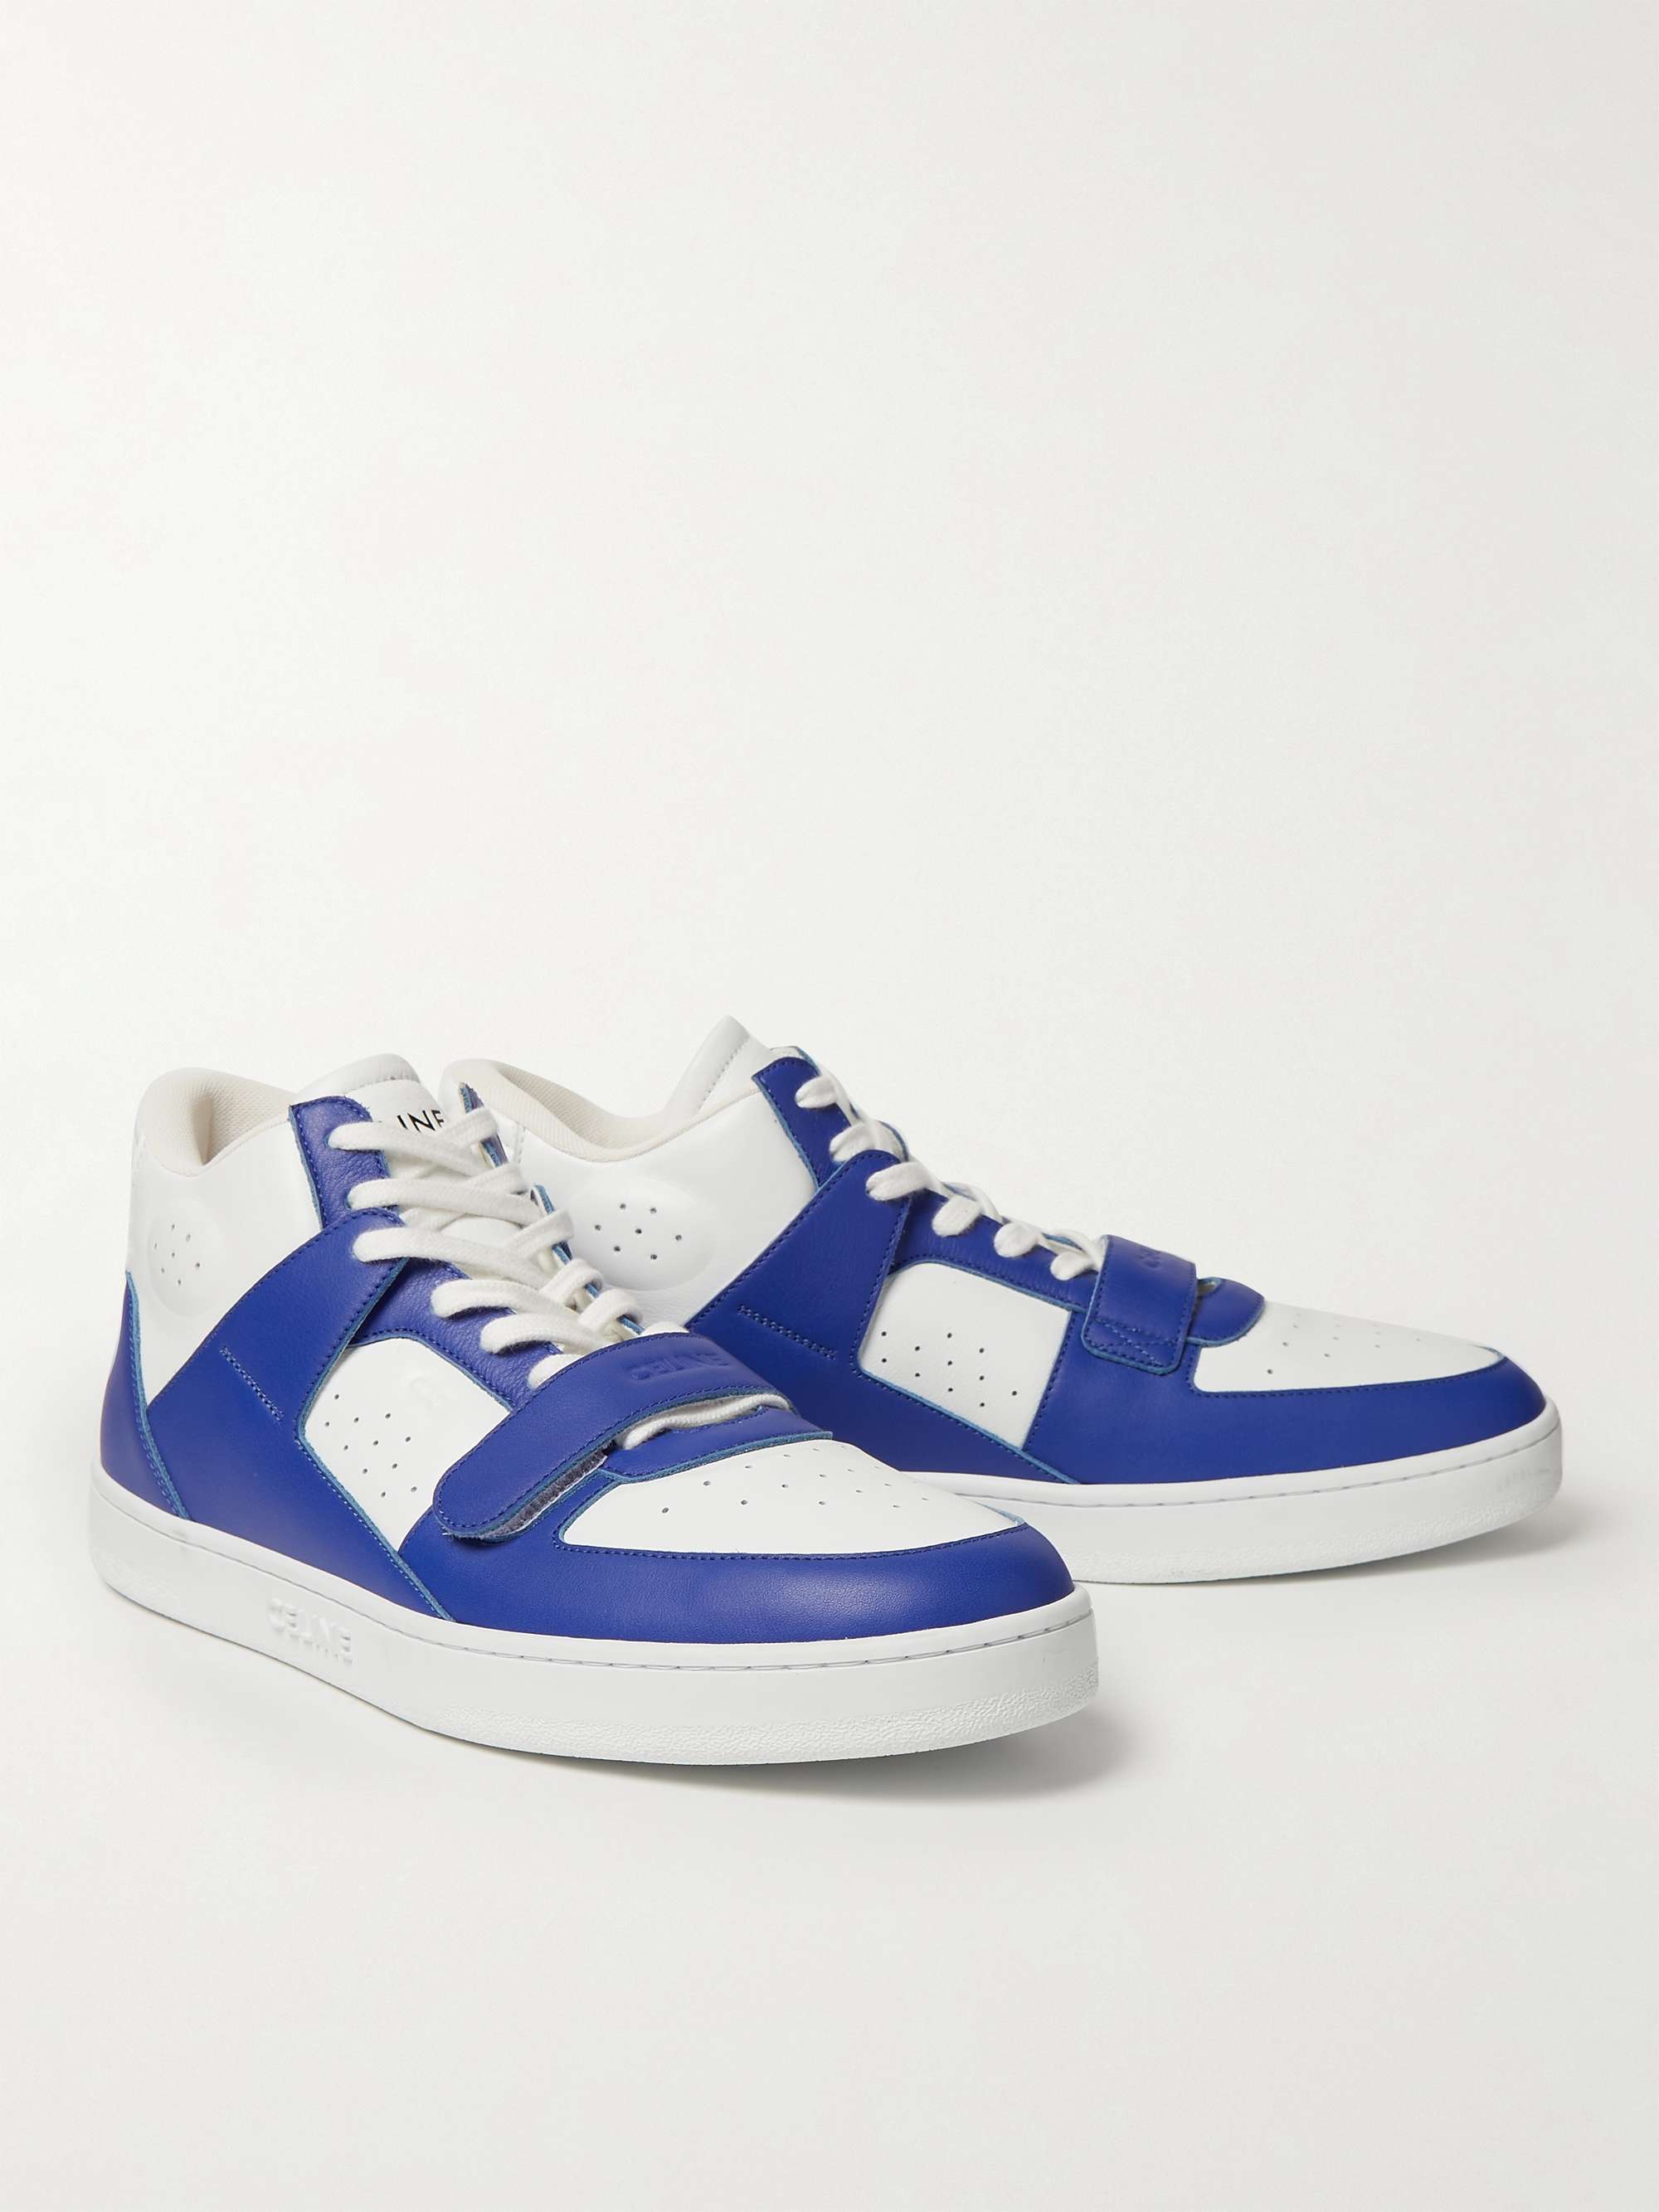 CT-02 Colour-Block Leather High-Top Sneakers